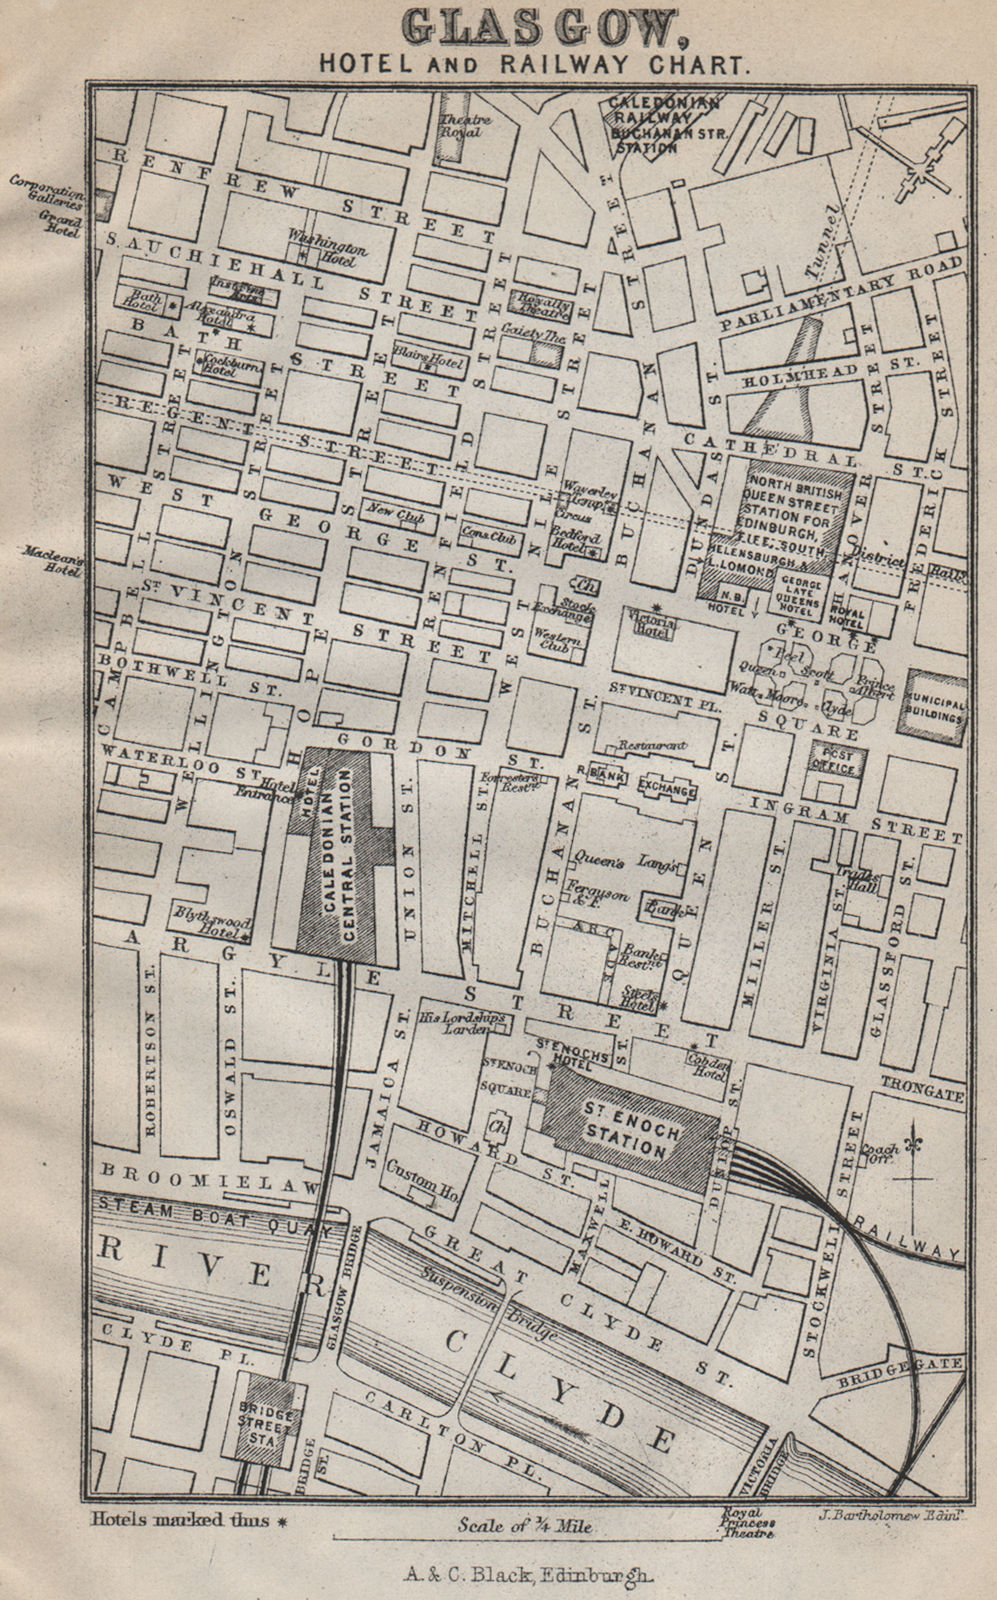 Associate Product GLASGOW Hotel and Railway Chart. Caledonian central & St Enoch stations 1886 map